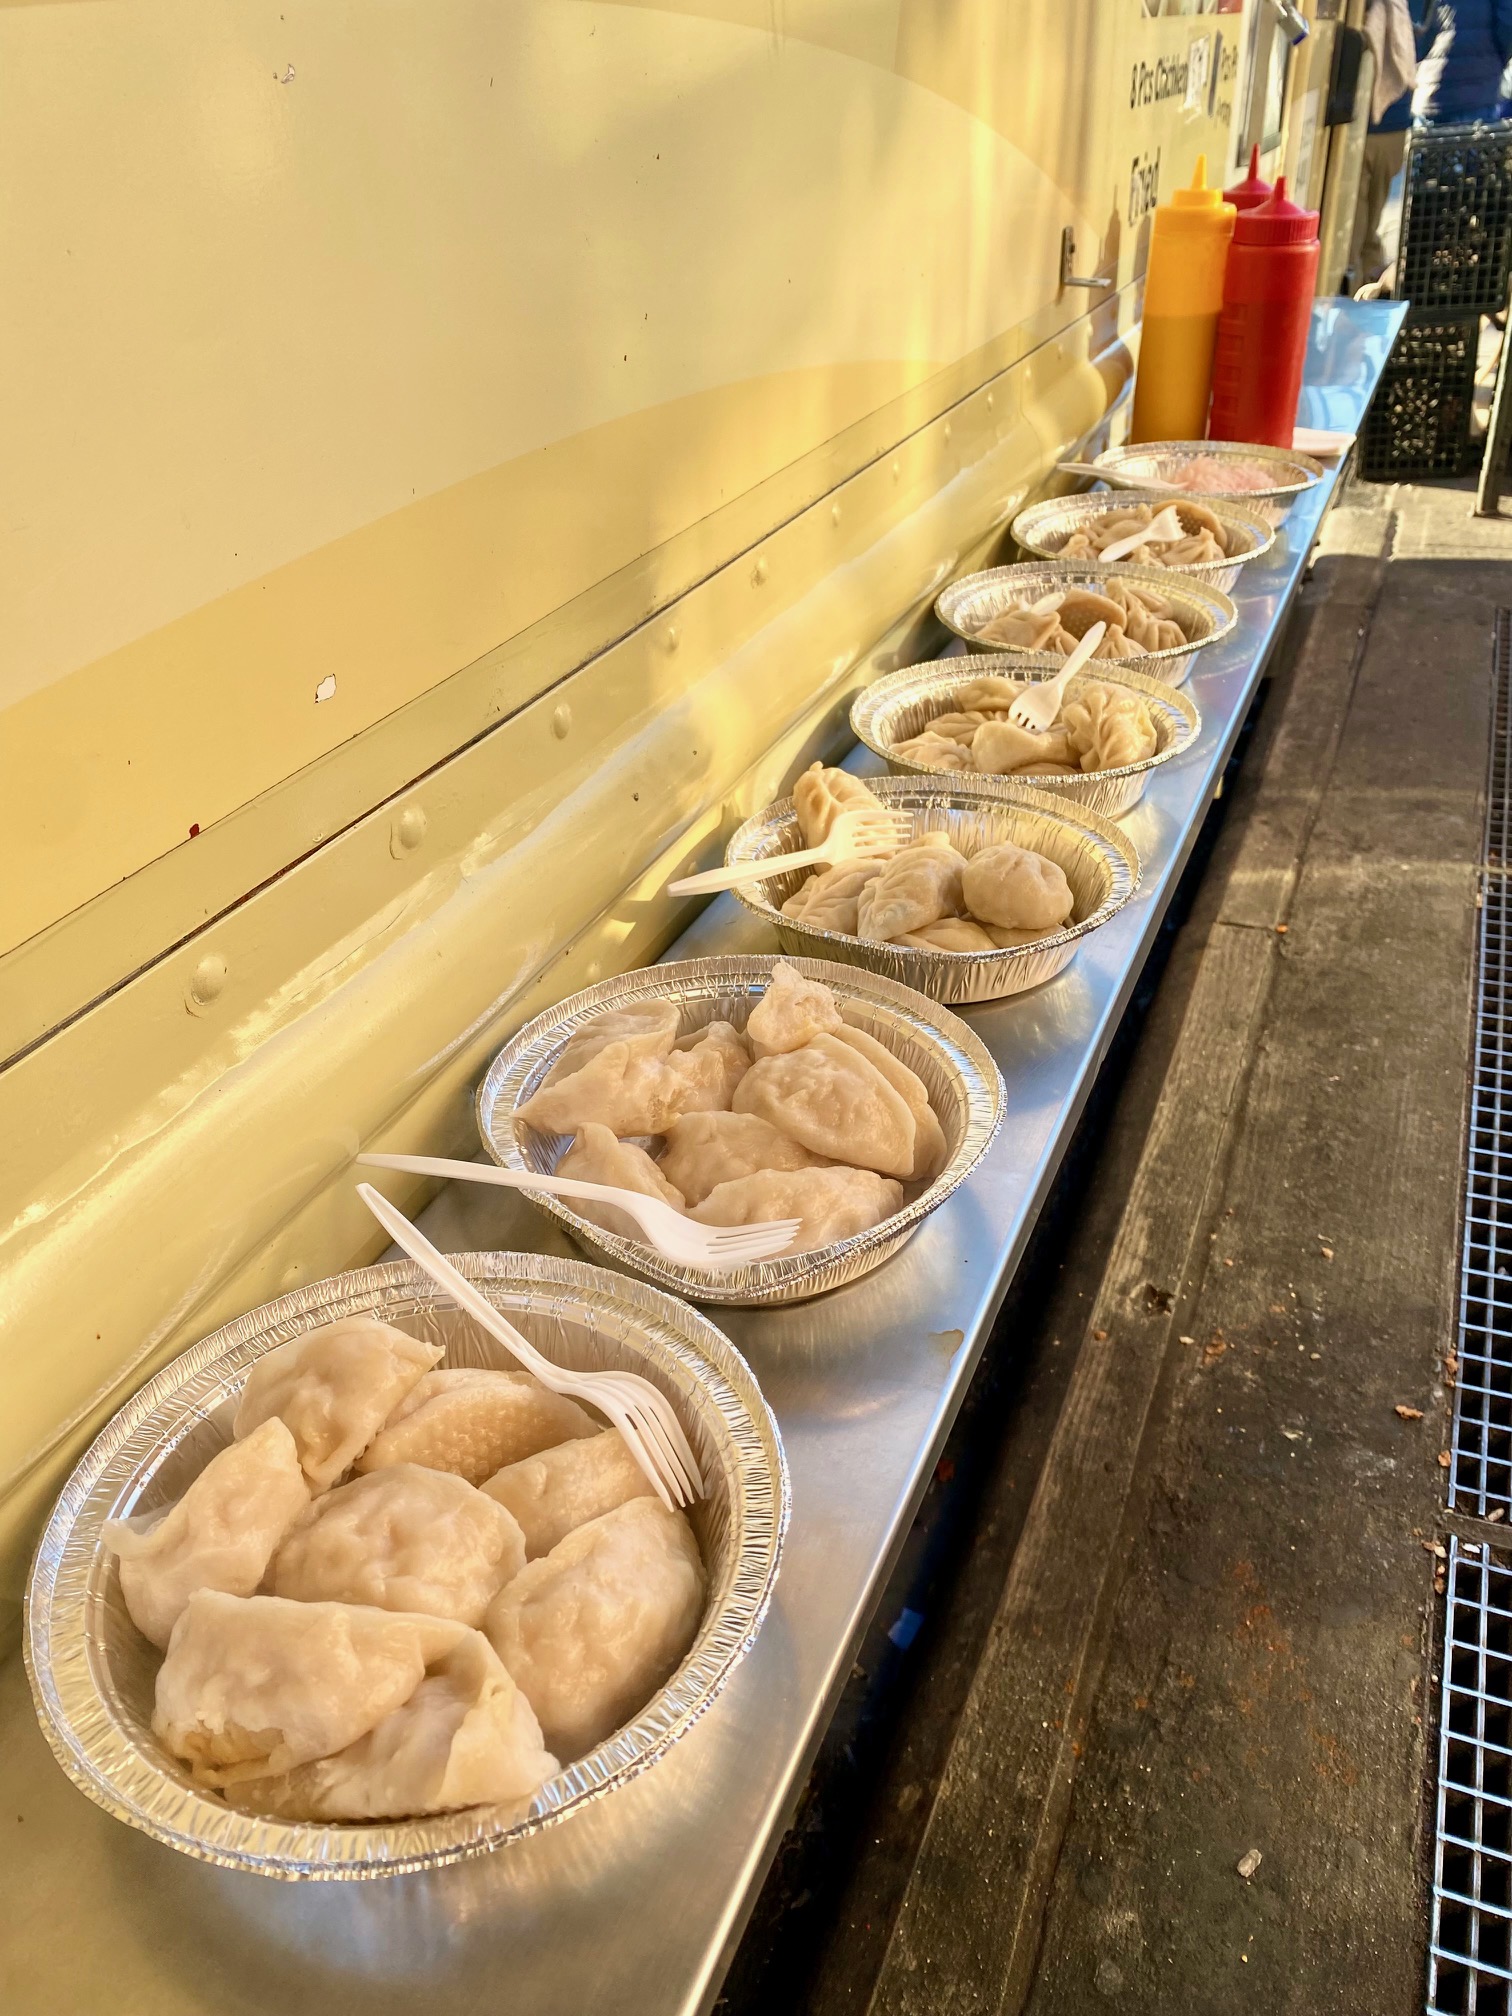 Tibetan momo (dumplings) lined up on a truck in Jackson Heights for a food tour.